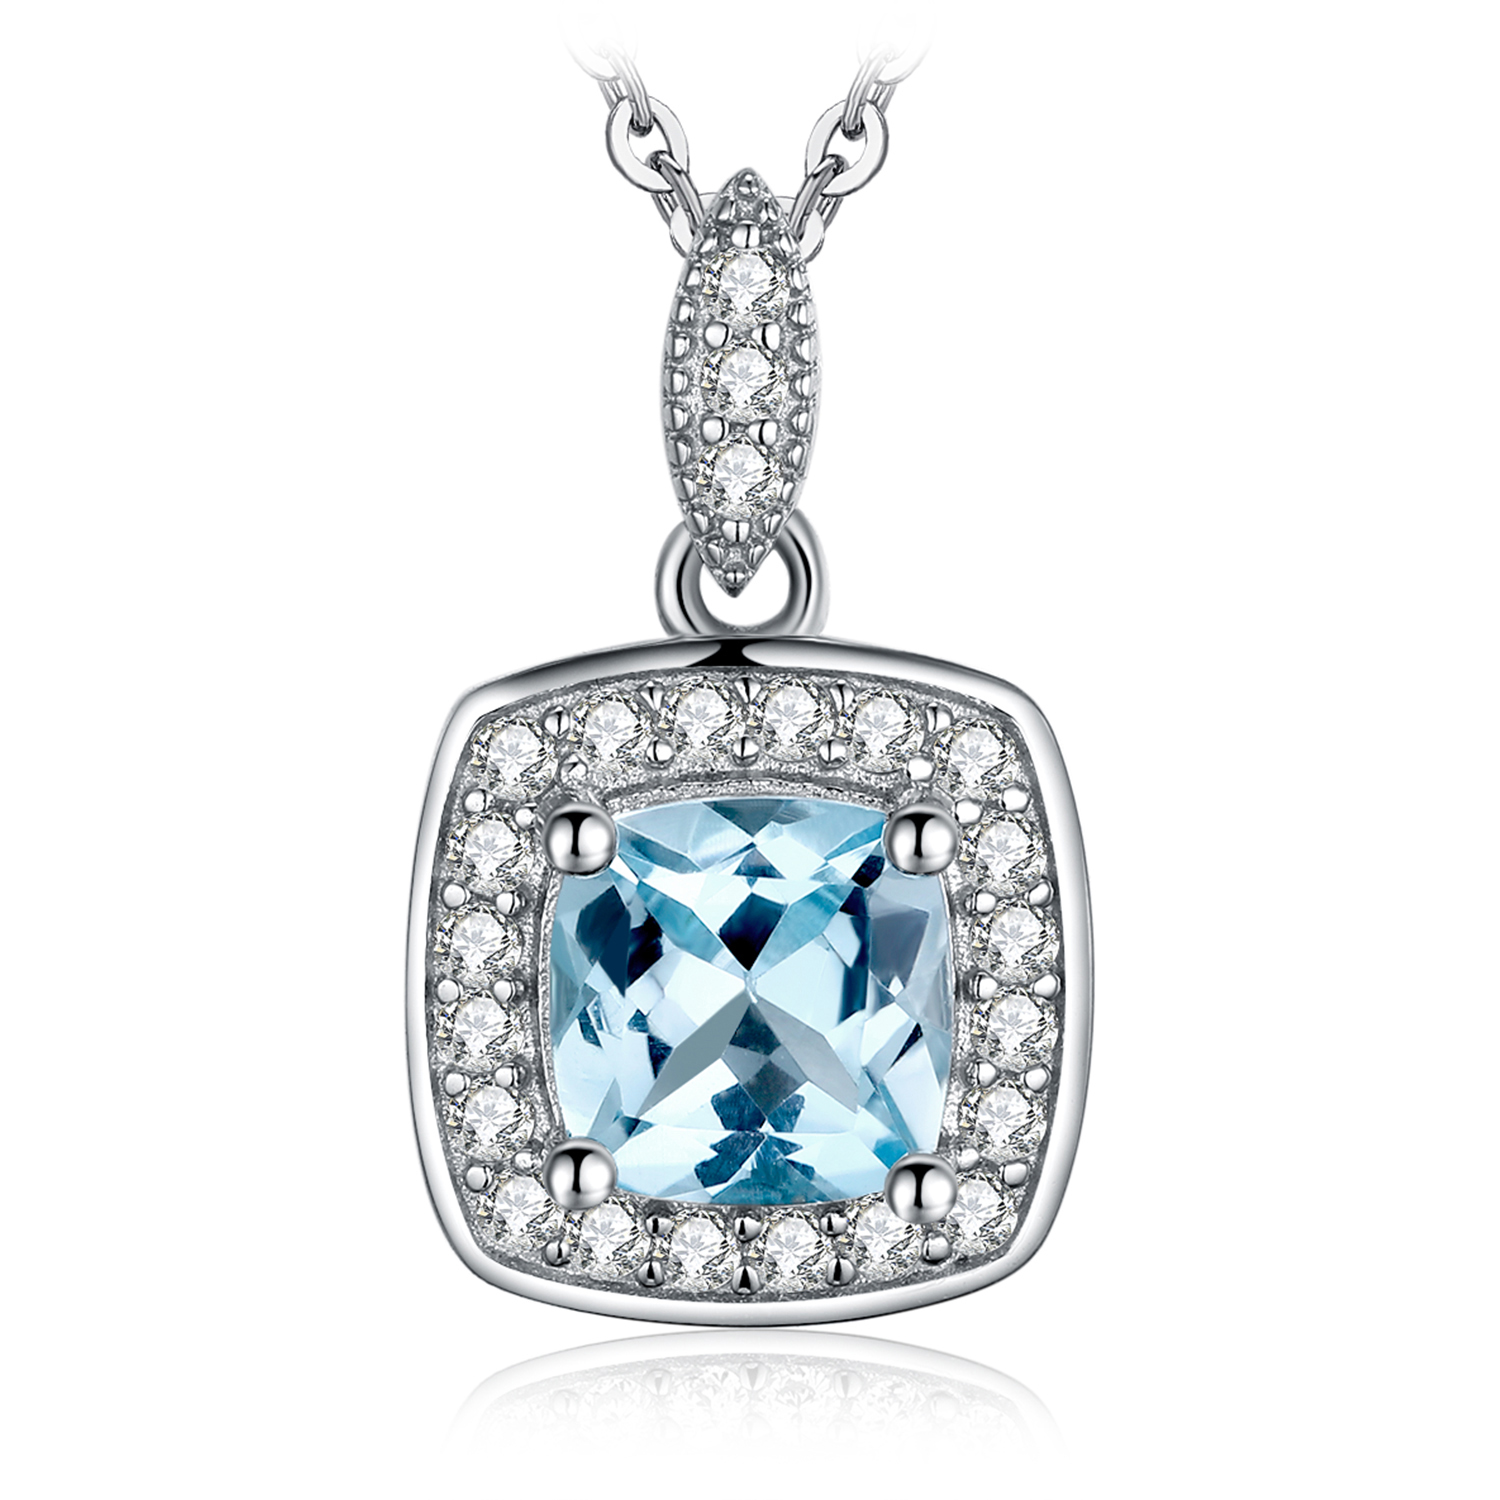 1.2ct Cushion Cut Genuine Topaz CZ Pendant Necklace Sterling Silver JewelryPalace